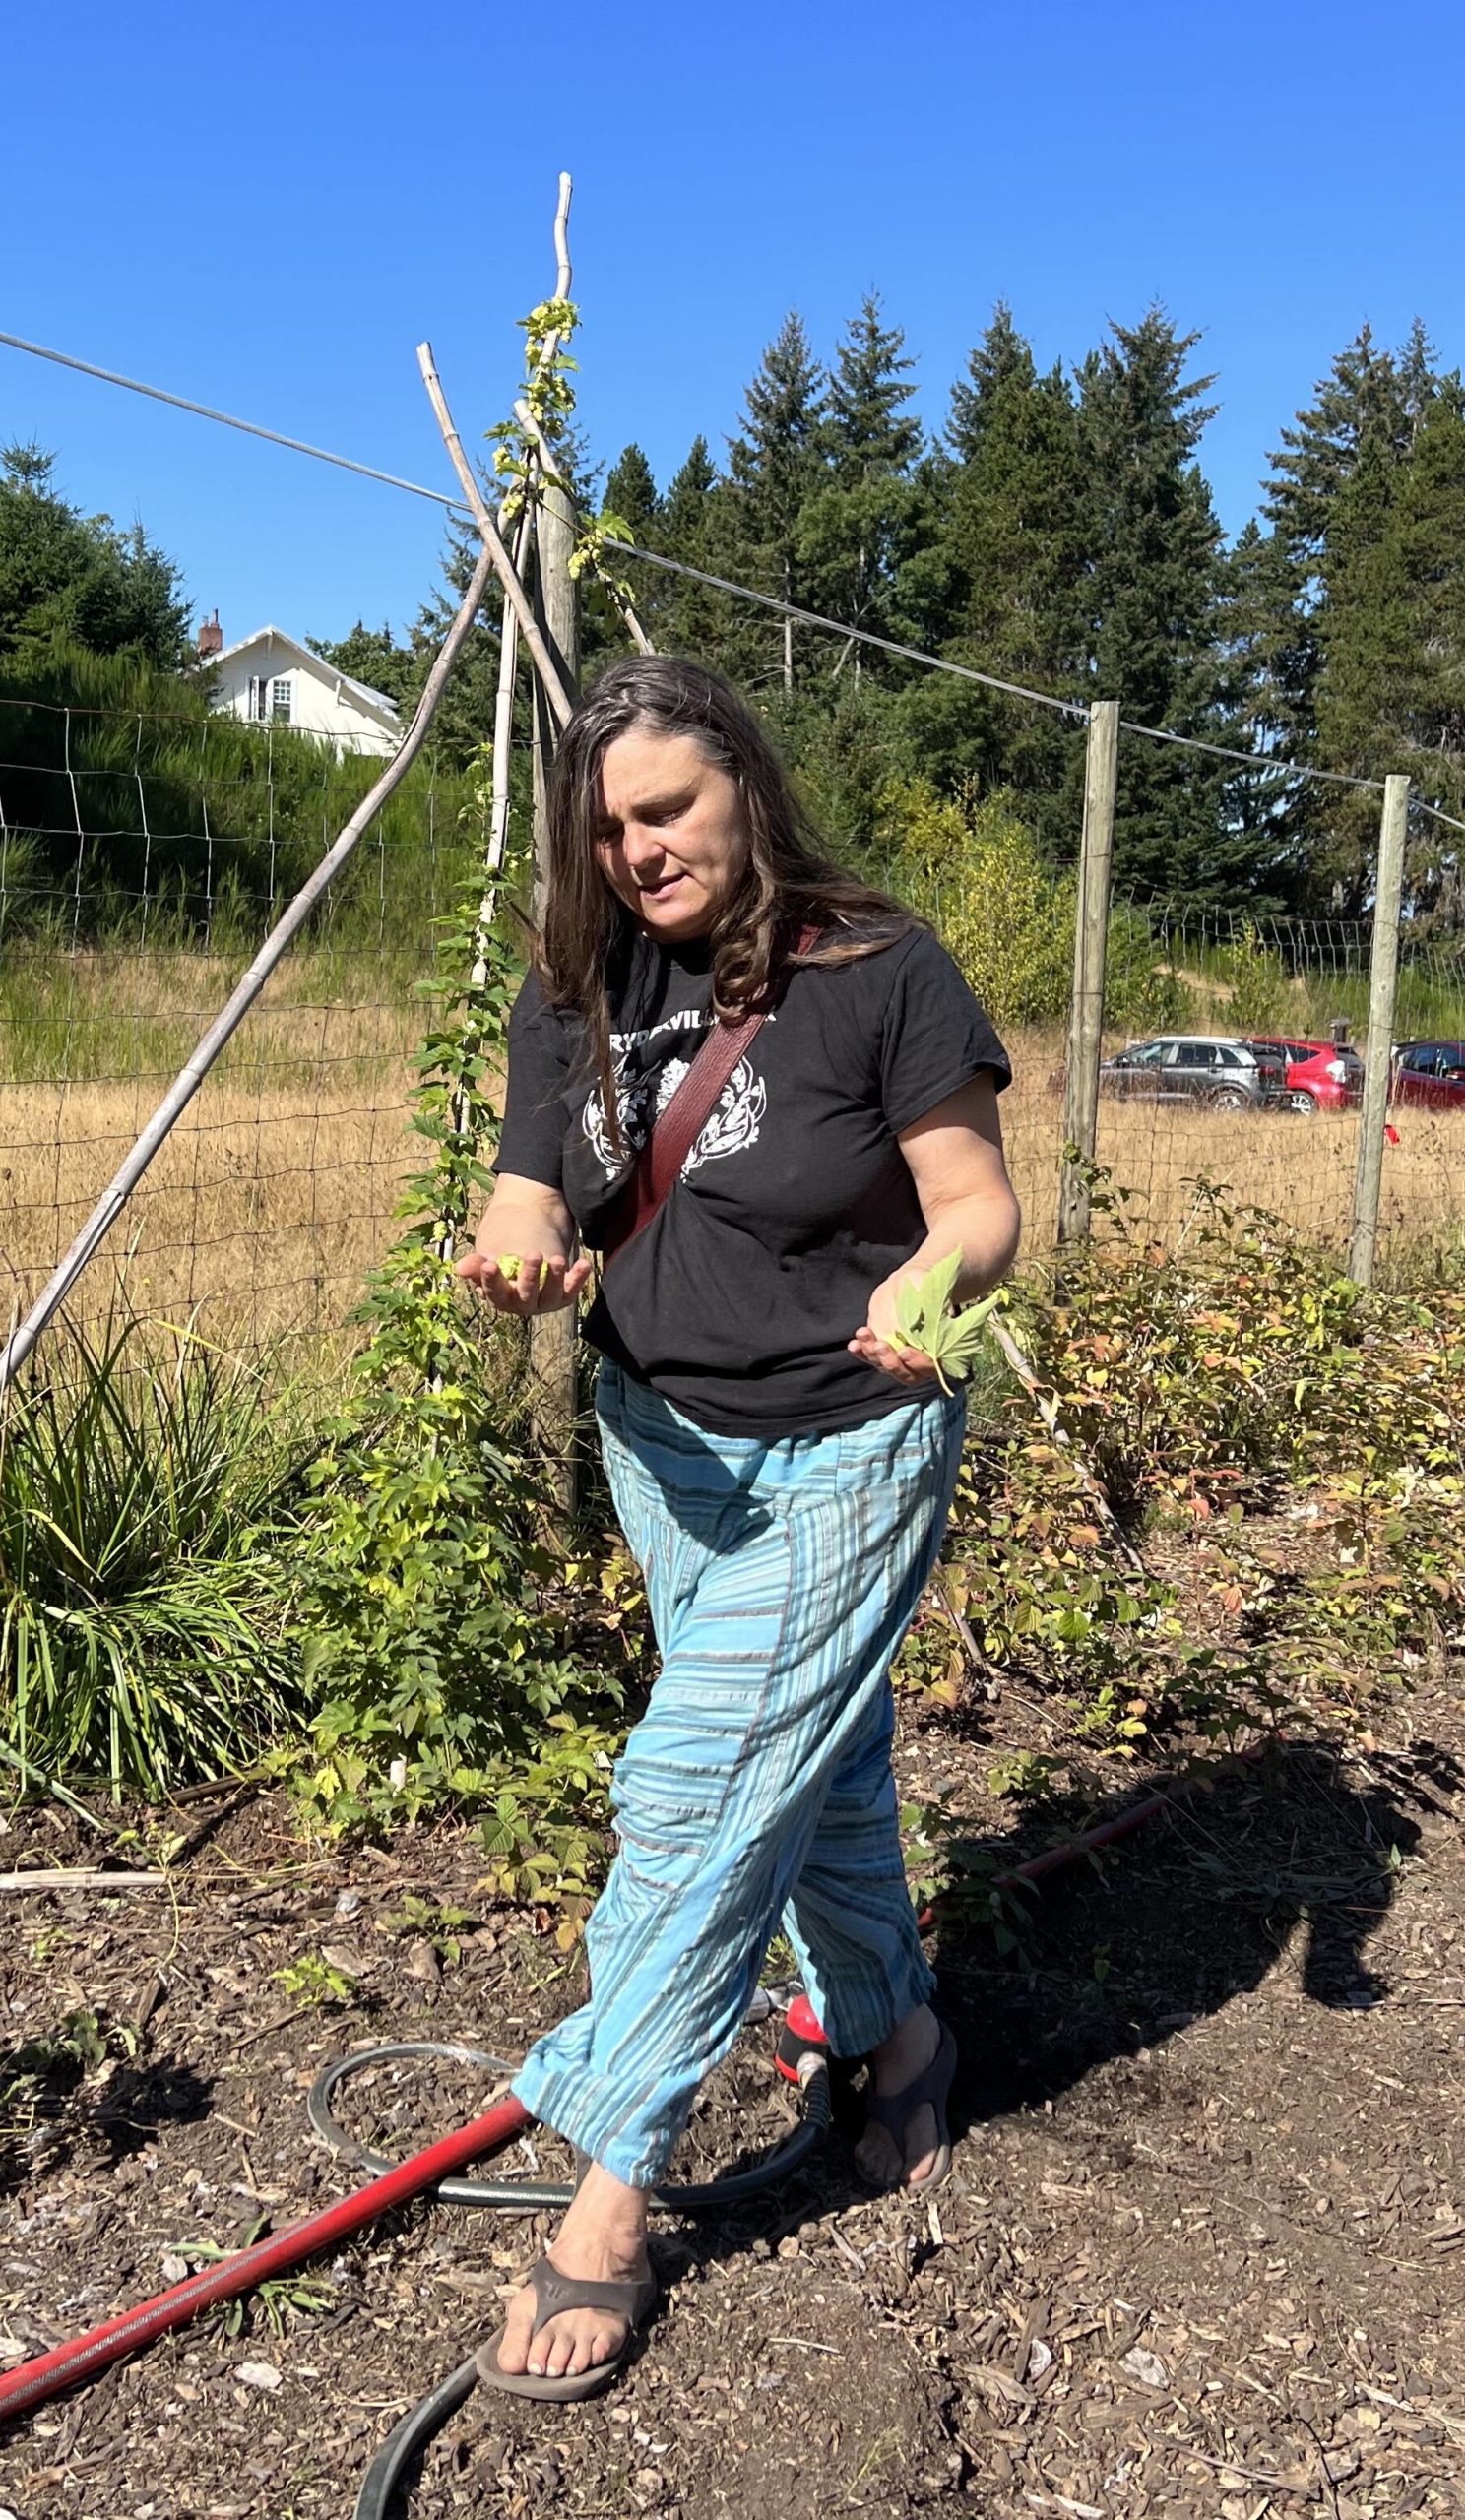 Tracy Lang picks hops that were originally planted in Ryderville on Bainbridge Island in the 1850s.